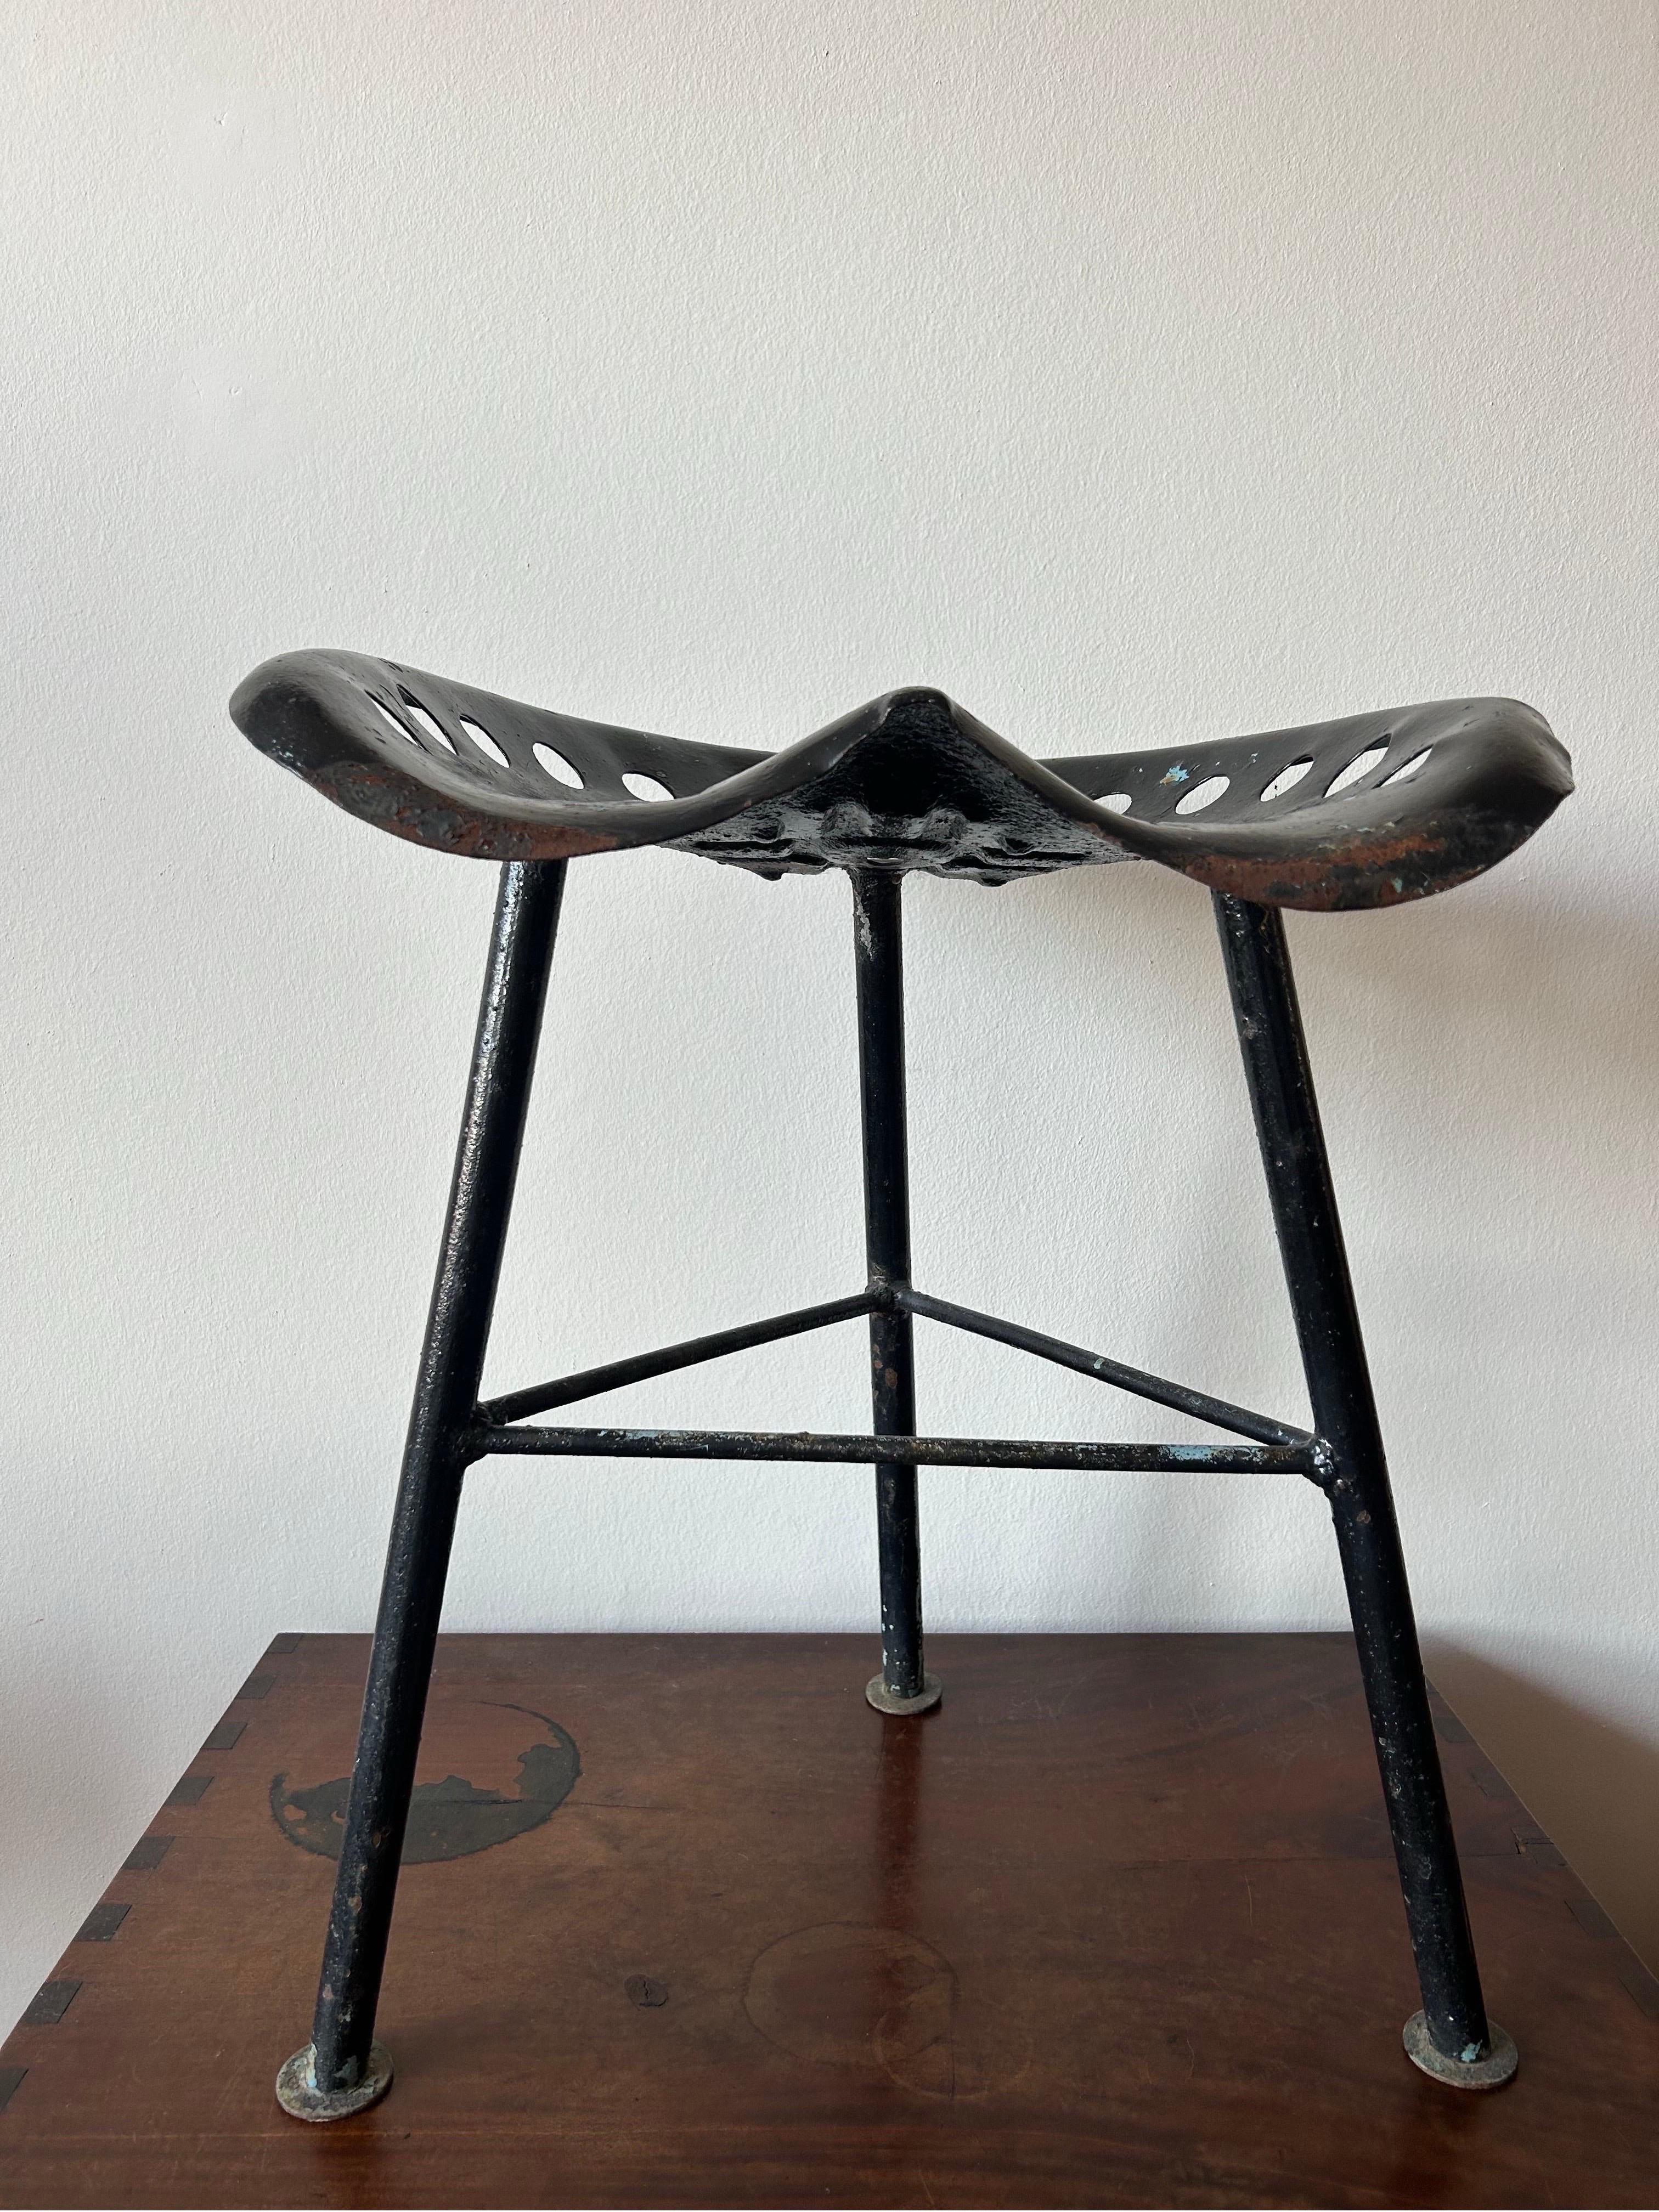 Rare Prototype of a Mogens Lassen tractor seat stool in black lacquered metal made in Denmark in the 1930’s.
The stool is a prototype of the tractor seat stool that can be seen used in the garden of Mogens Lassens own home, the stool from
Mogens